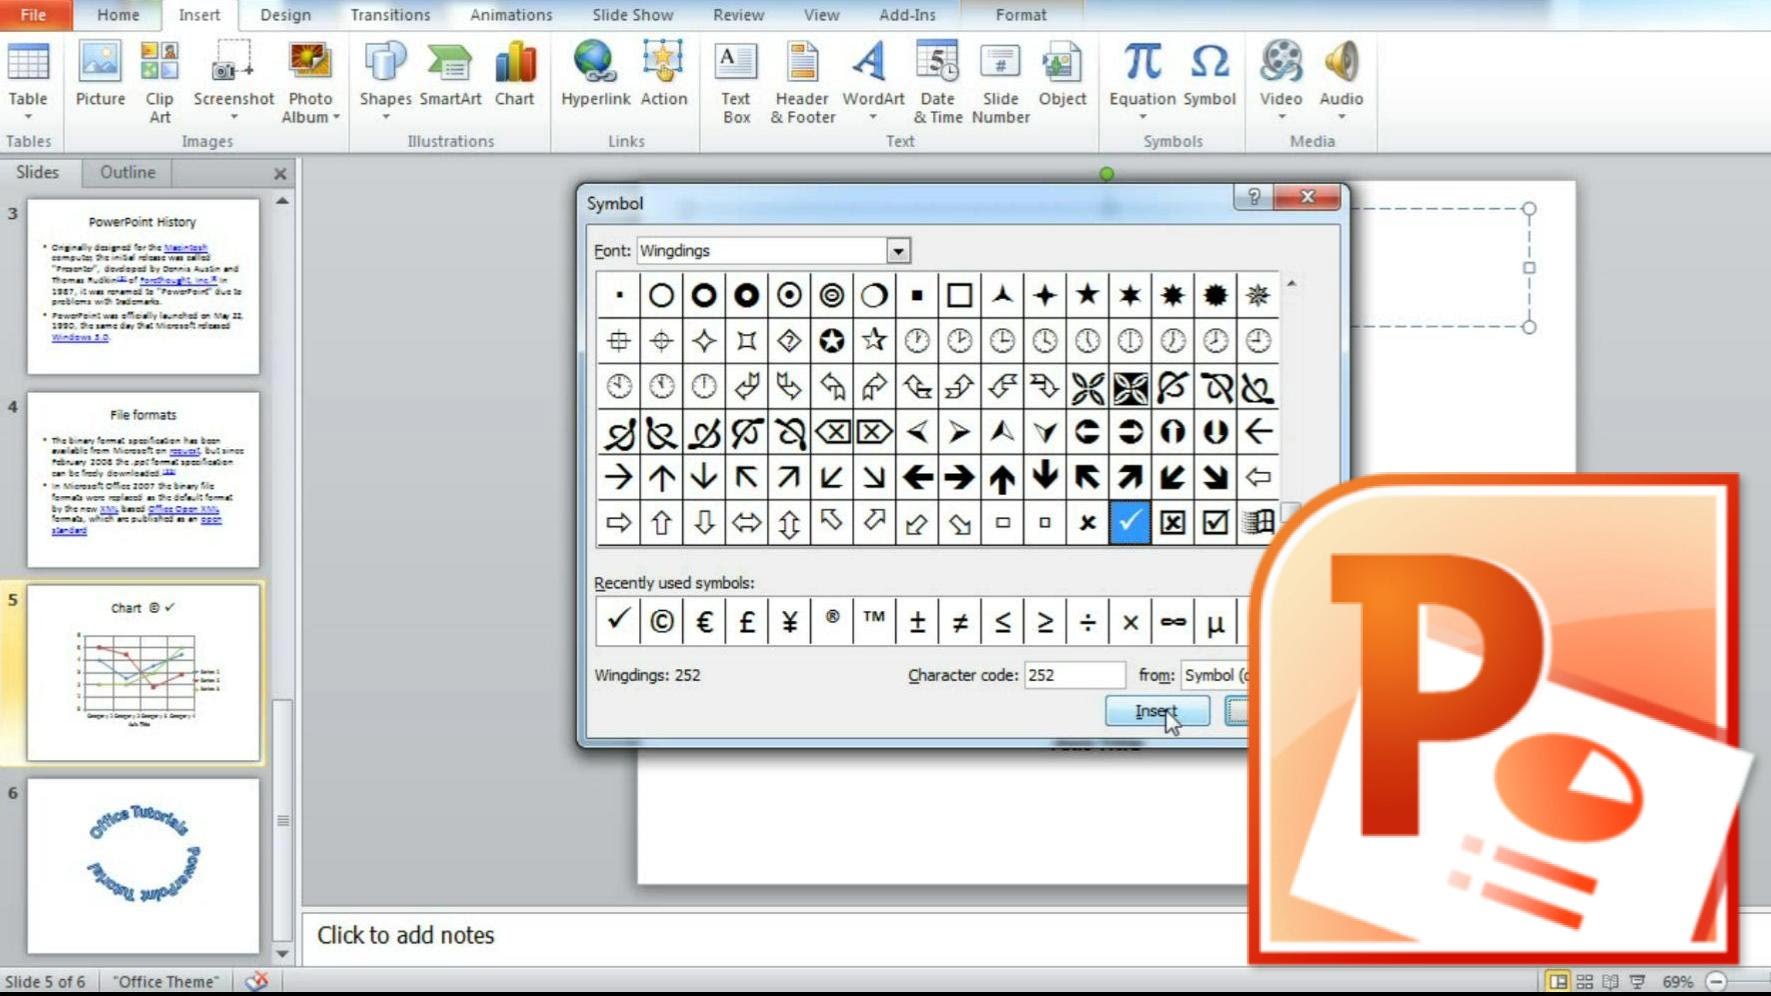 Powerpoint Icons - Download 75 Free Powerpoint icons here